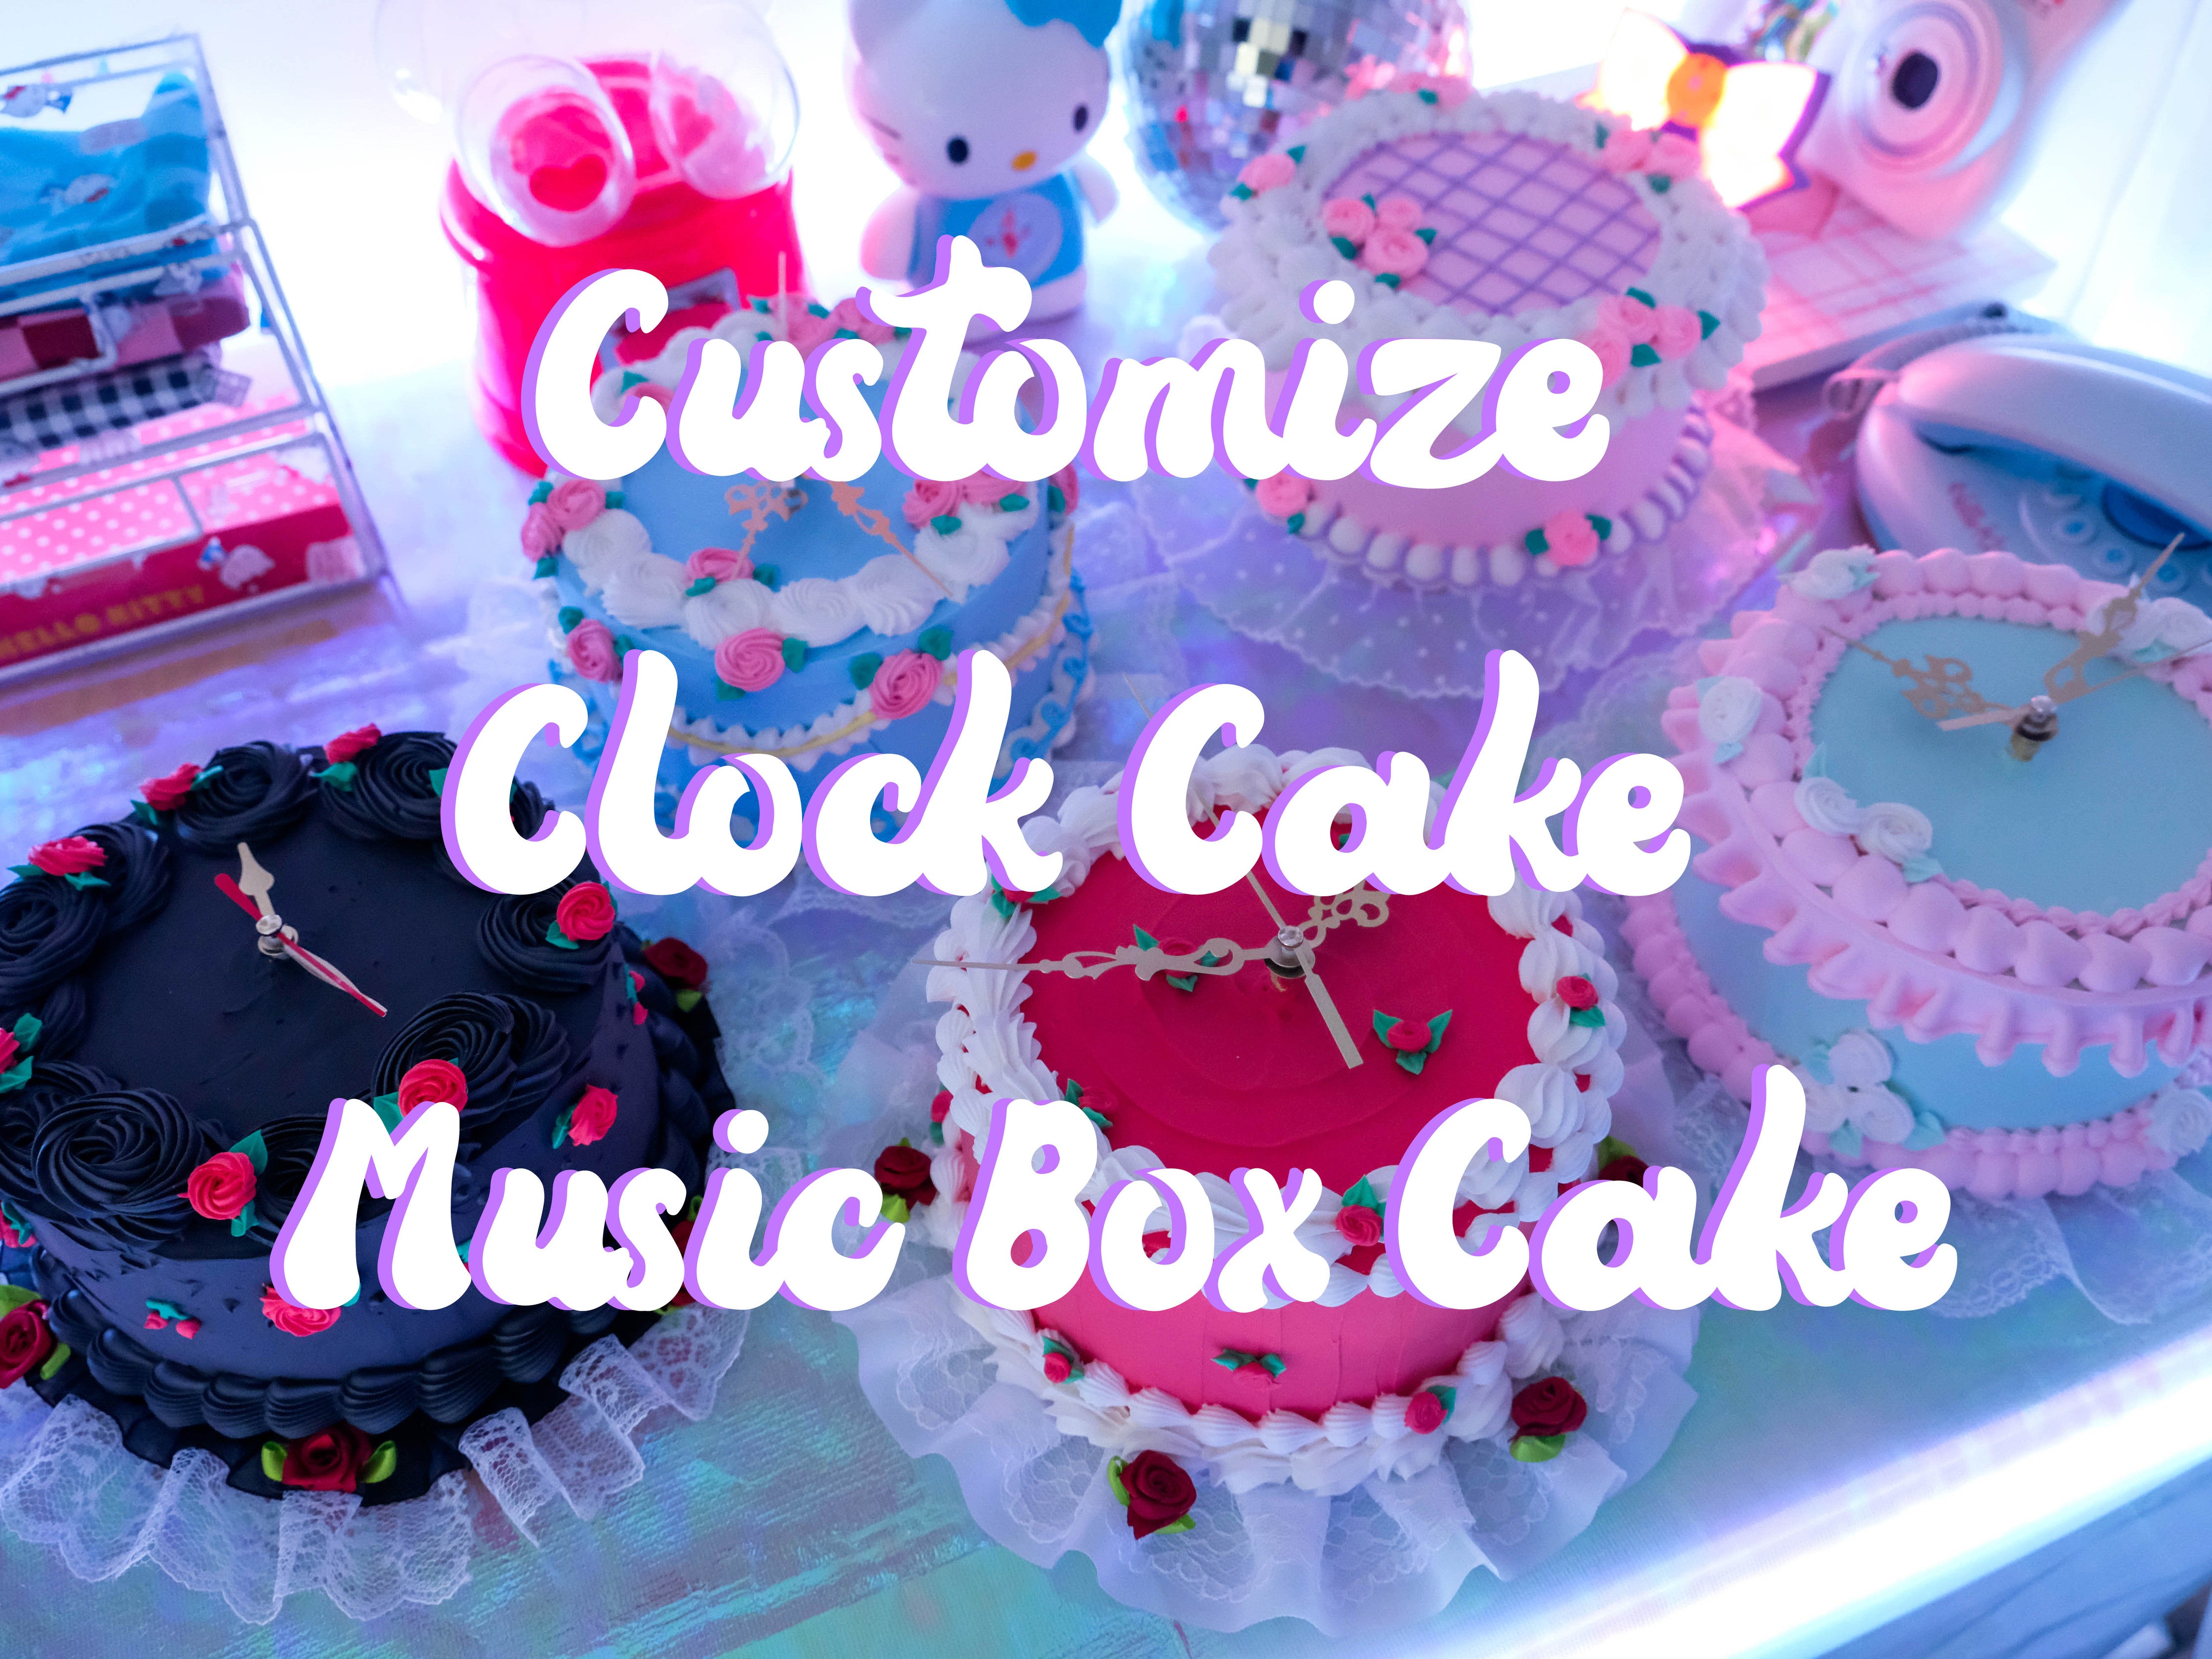 Personalized Clock with Black Currant Cake | Send A Cake & Gifts